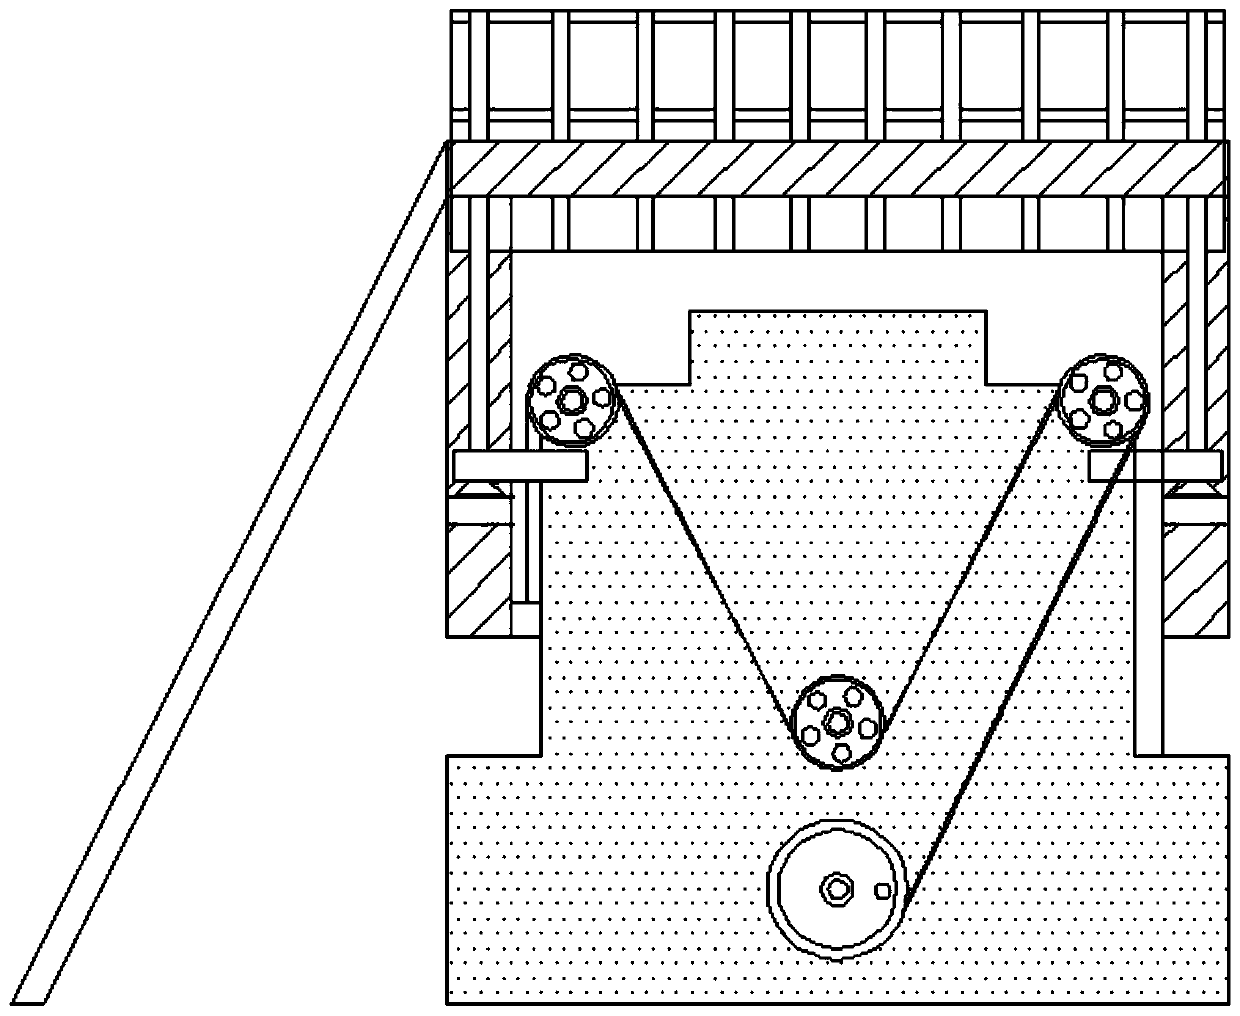 Lifting appliance with guardrail height and lifting table height being proportional